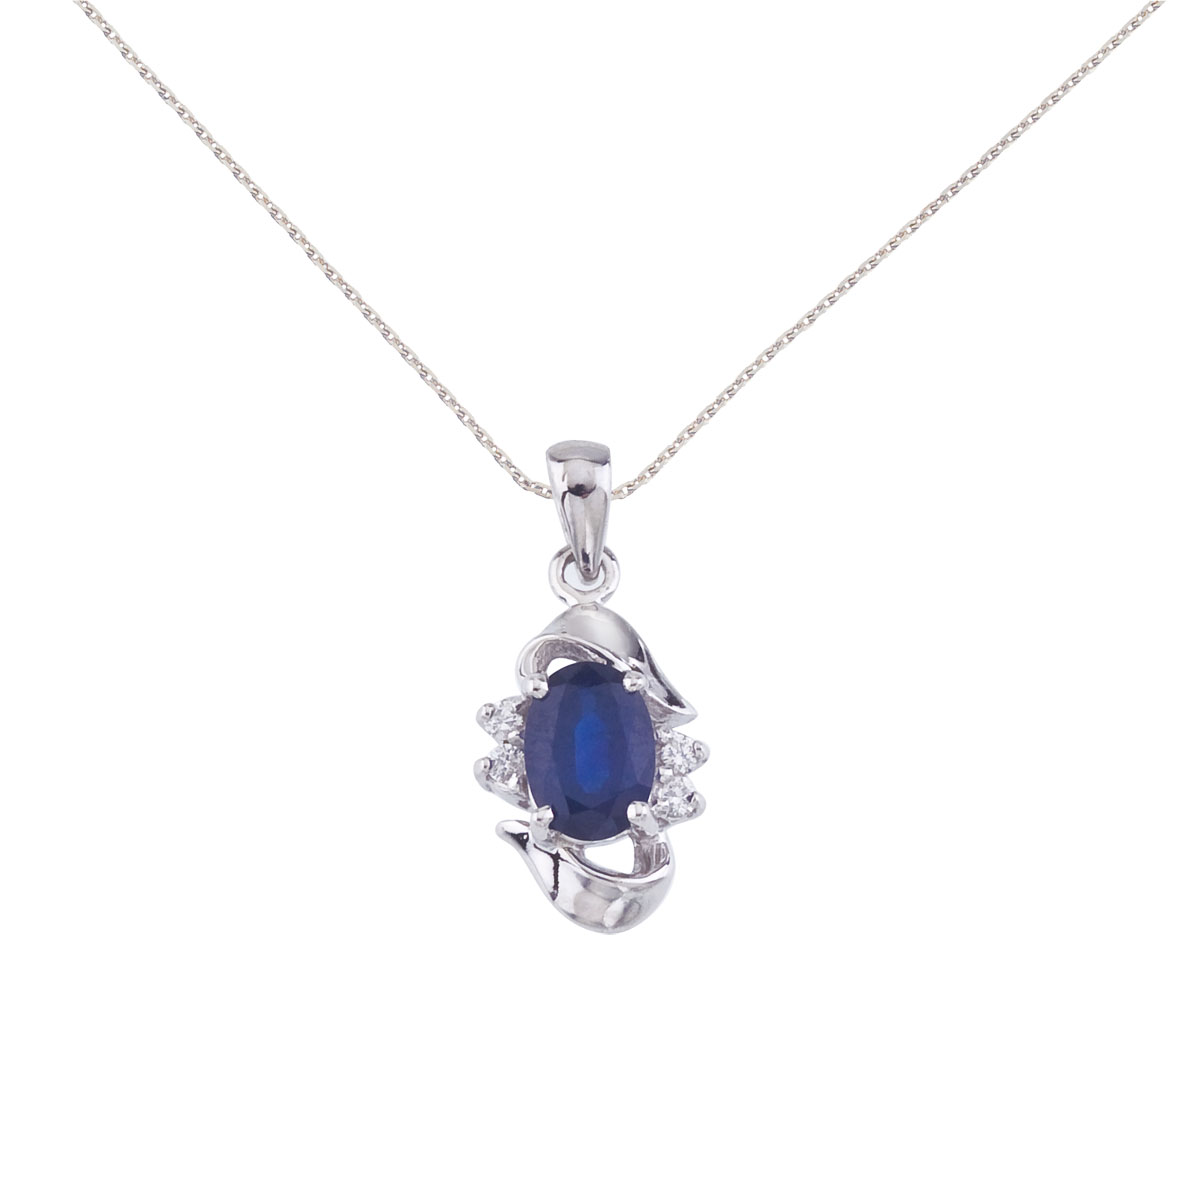 JCX2728: Add a hint of blue to your look with this 14k white gold emerald pendant. Featuring a genuine 7x5 mm sapphire surrounded by .06 carats of sparkling diamonds.